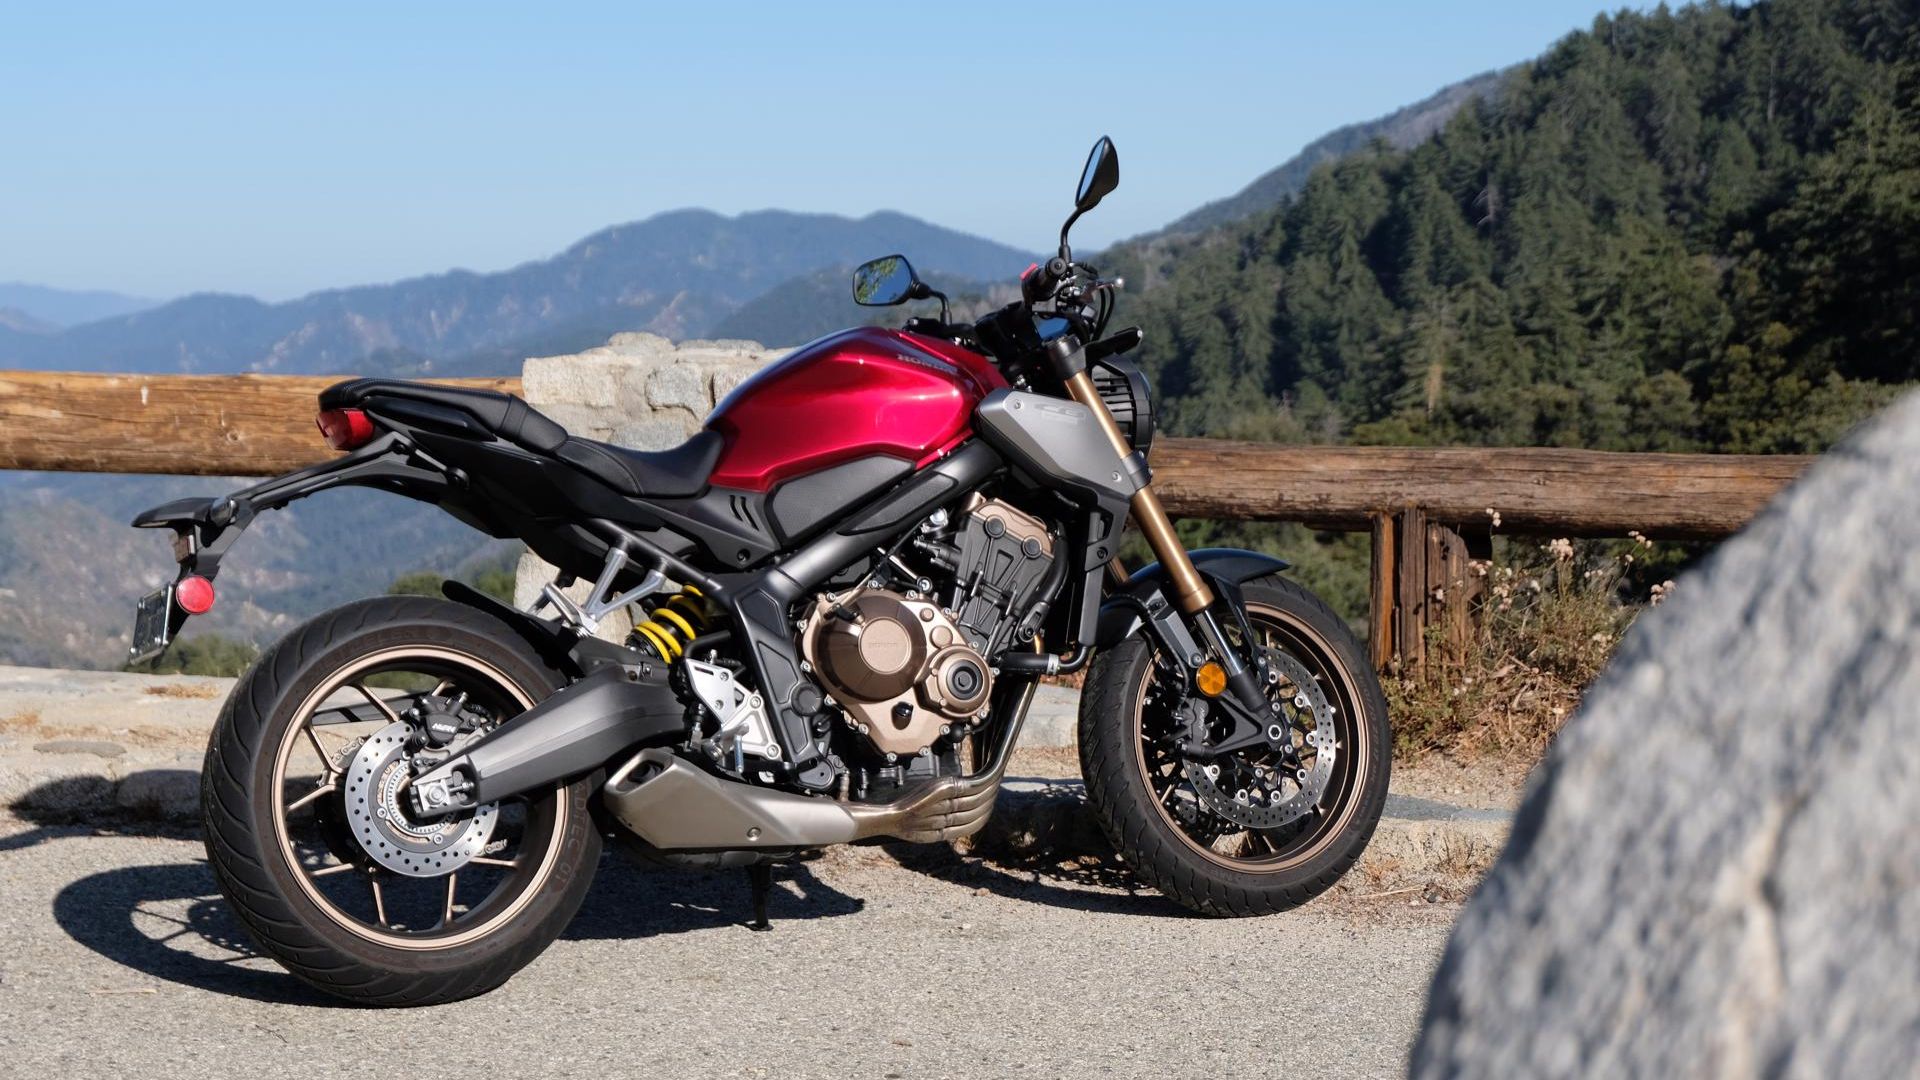 2020 Honda CB650R Review: The Right Salve for These Chaotic Times